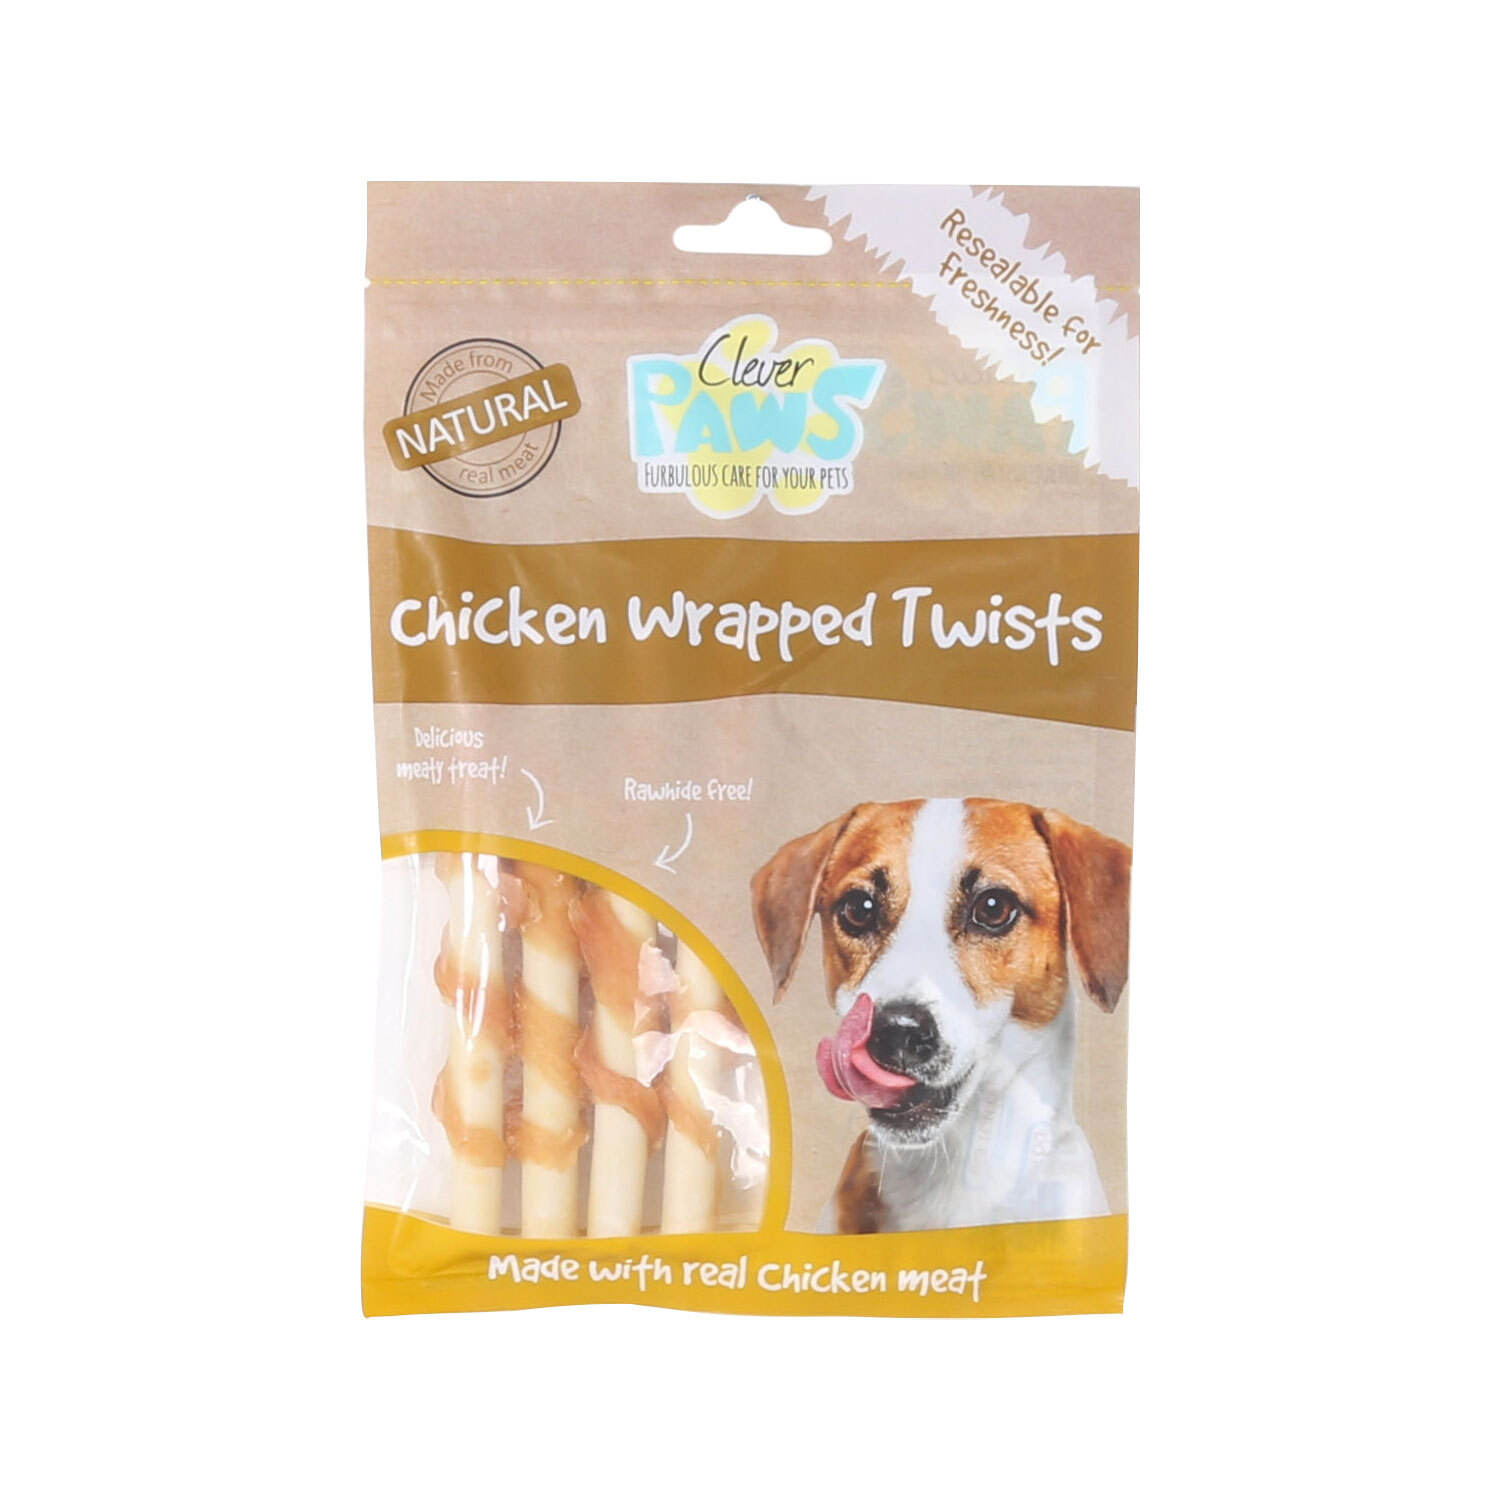 Clever Paws Chicken Wrapped Twists Dog Treat 80g Image